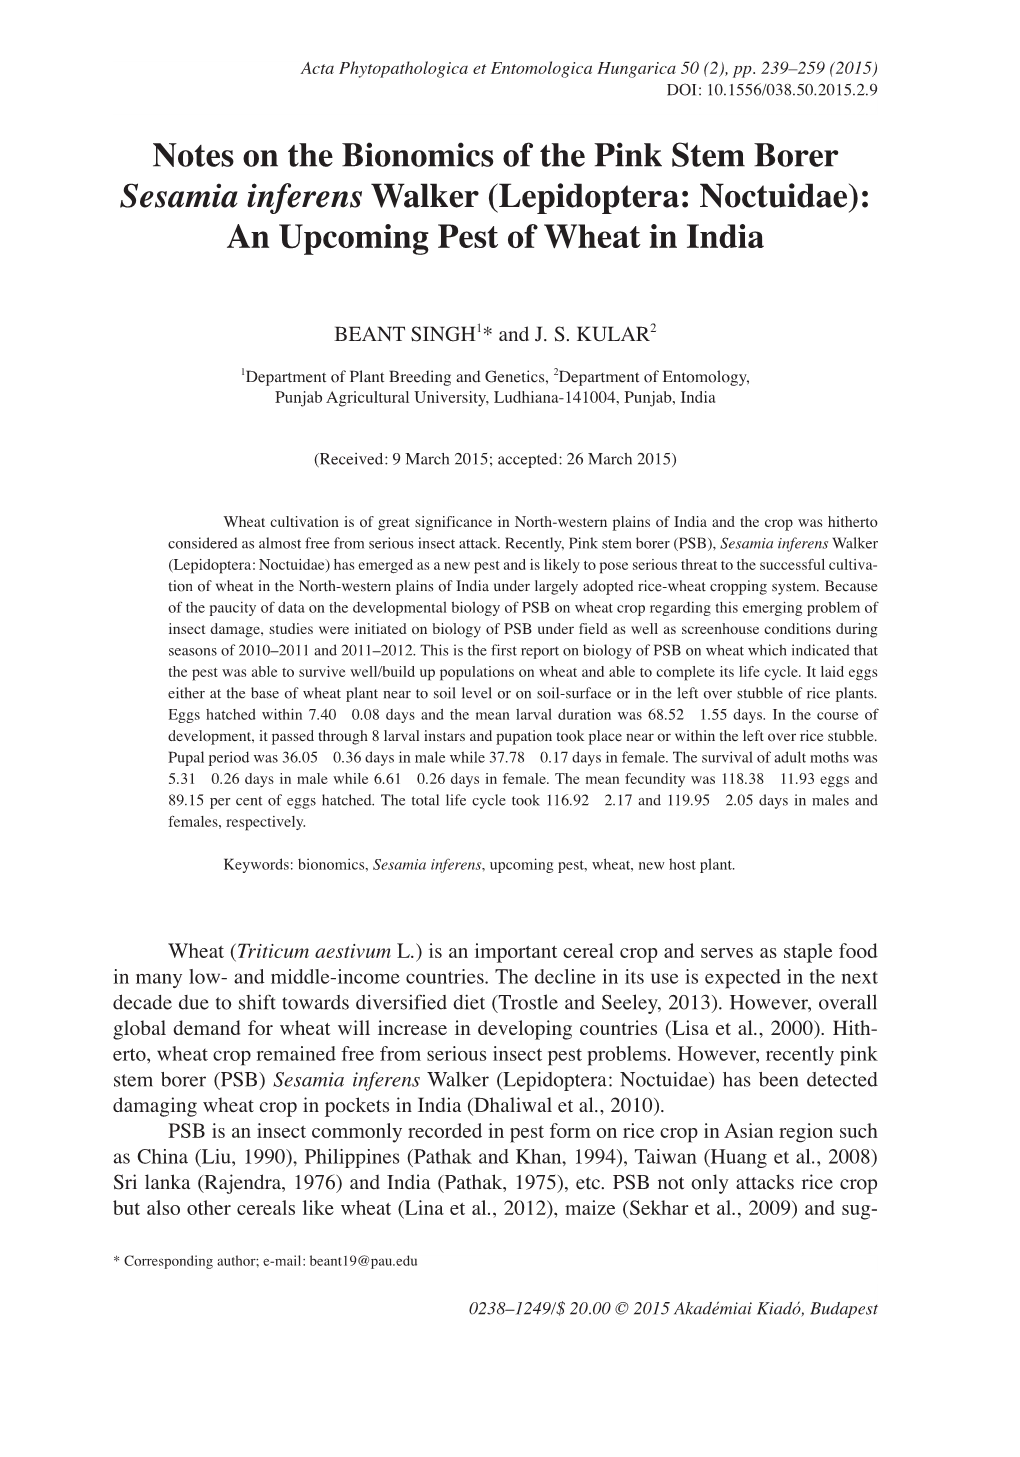 Notes on the Bionomics of the Pink Stem Borer Sesamia Inferens Walker (Lepidoptera: Noctuidae): an Upcoming Pest of Wheat in India